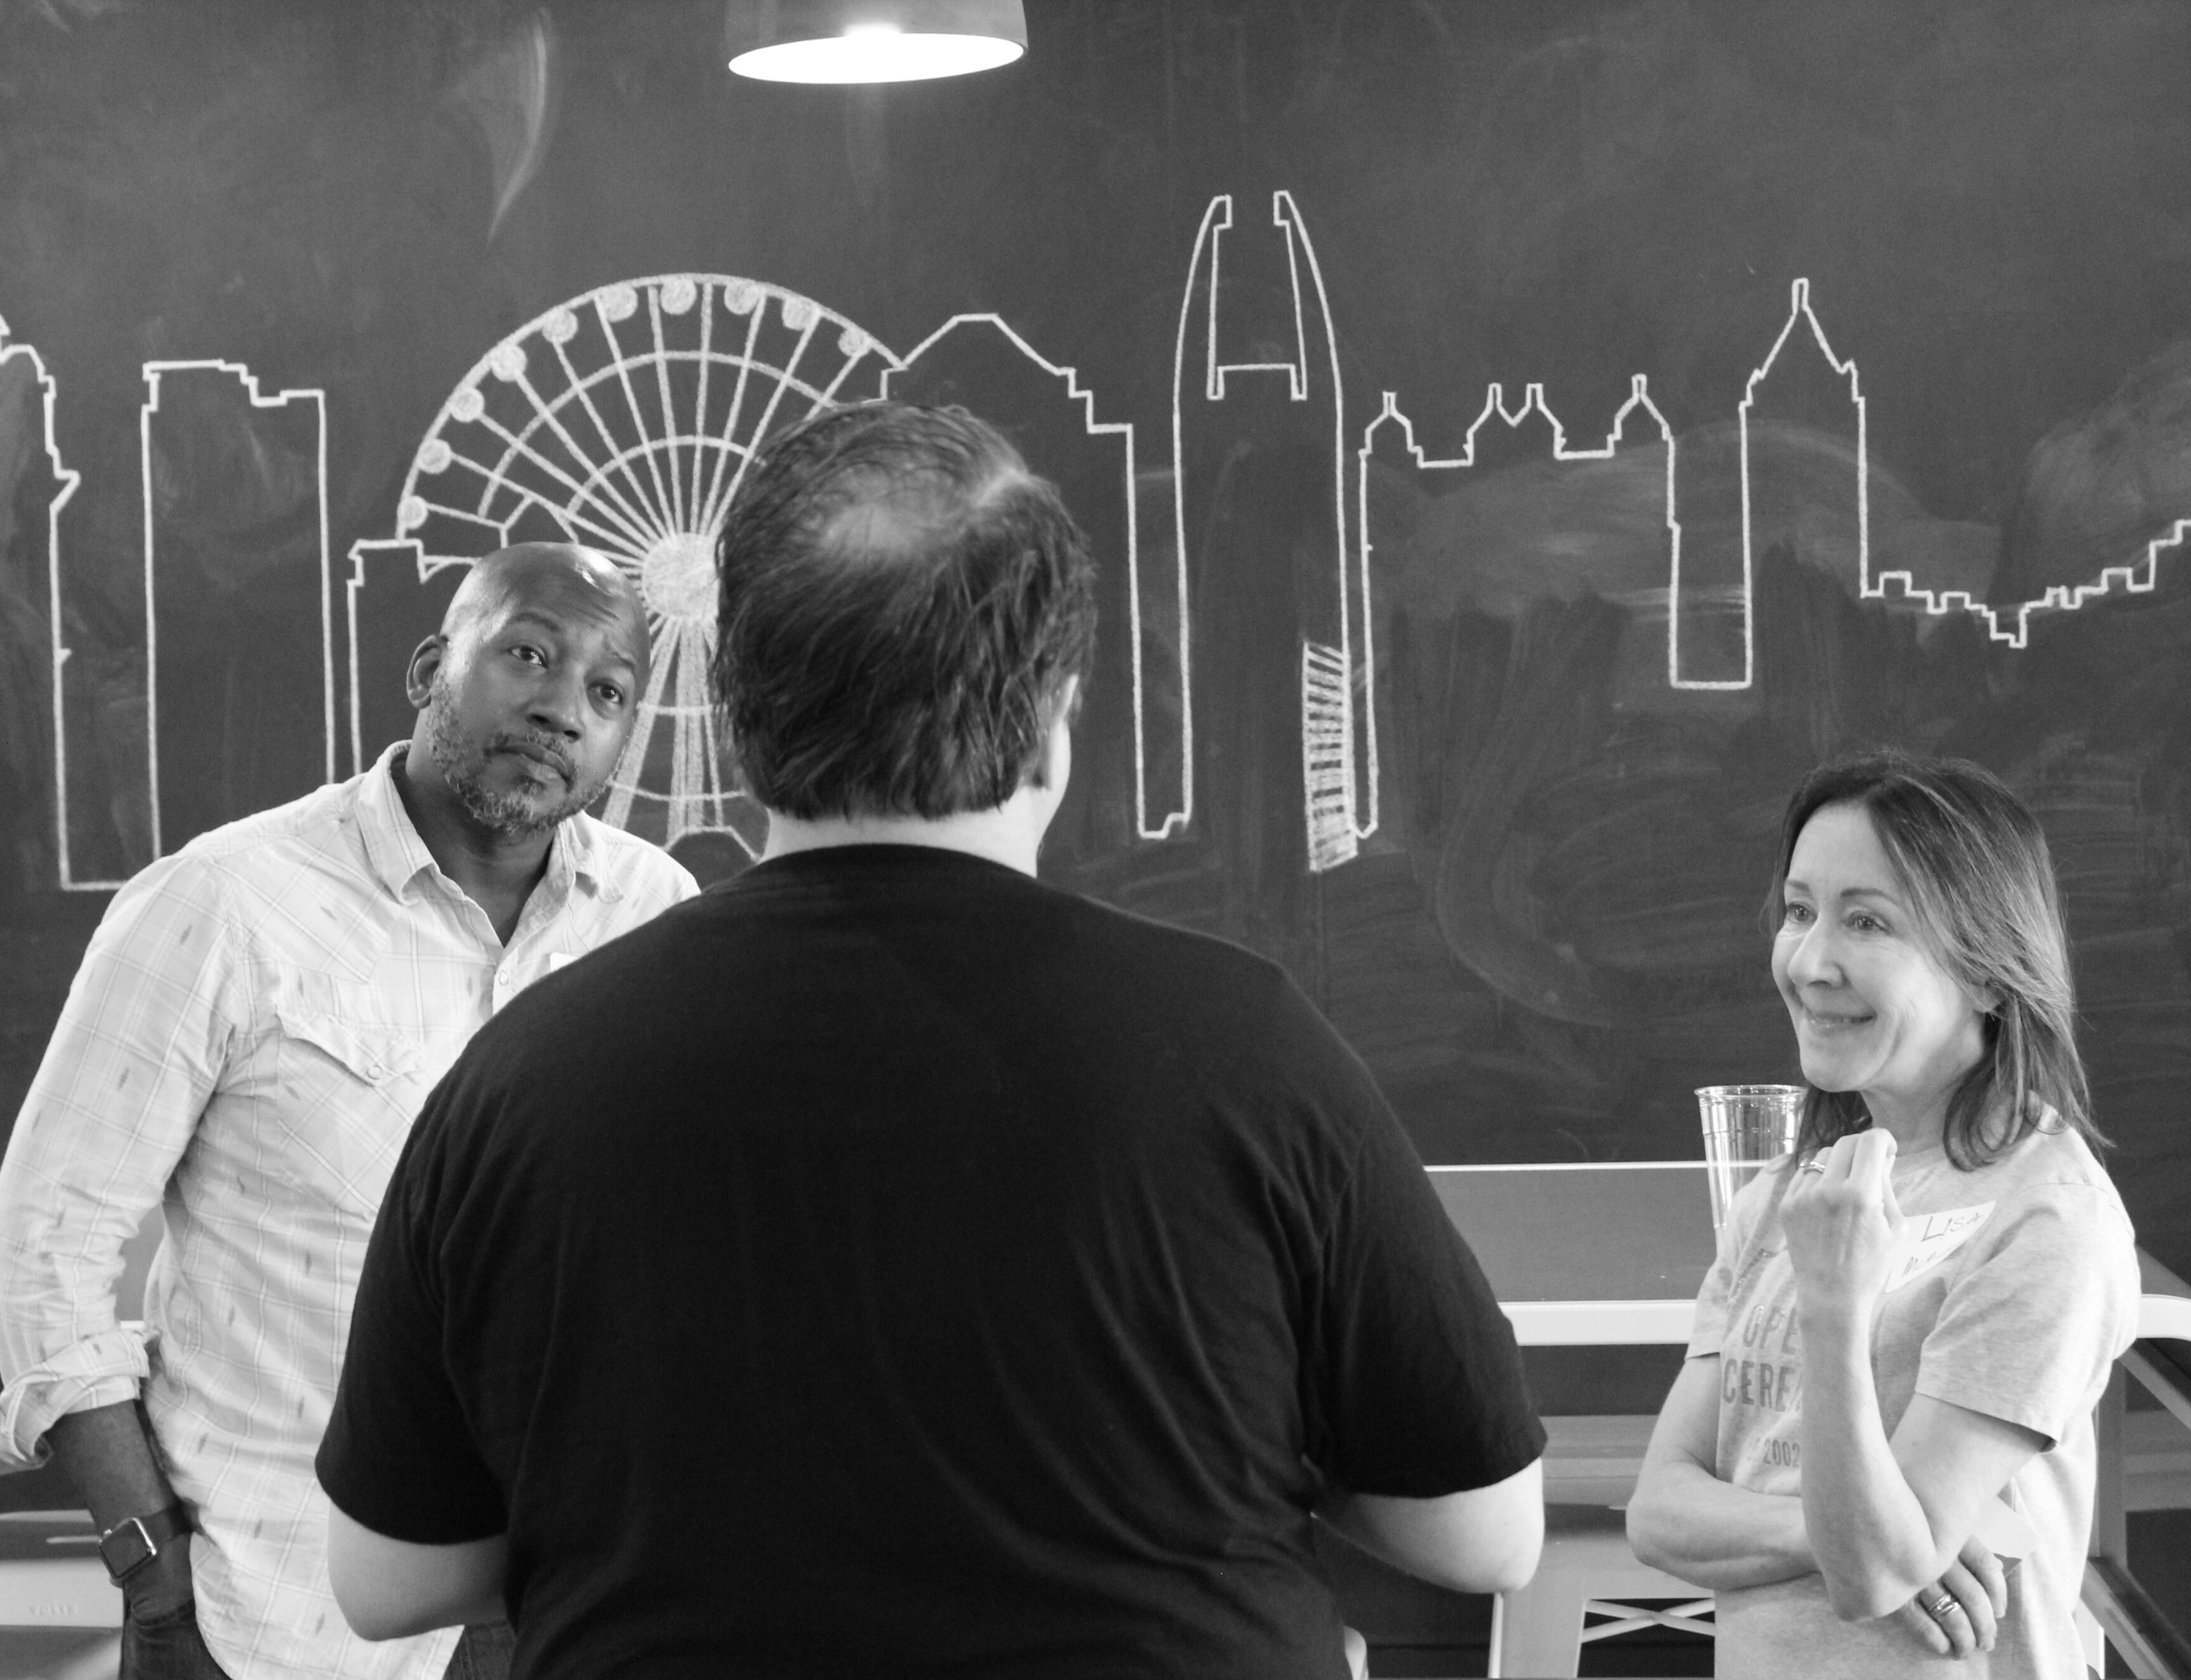 Diverse group smiling and networking with a drawing of buildings on a chalkboard in the background.